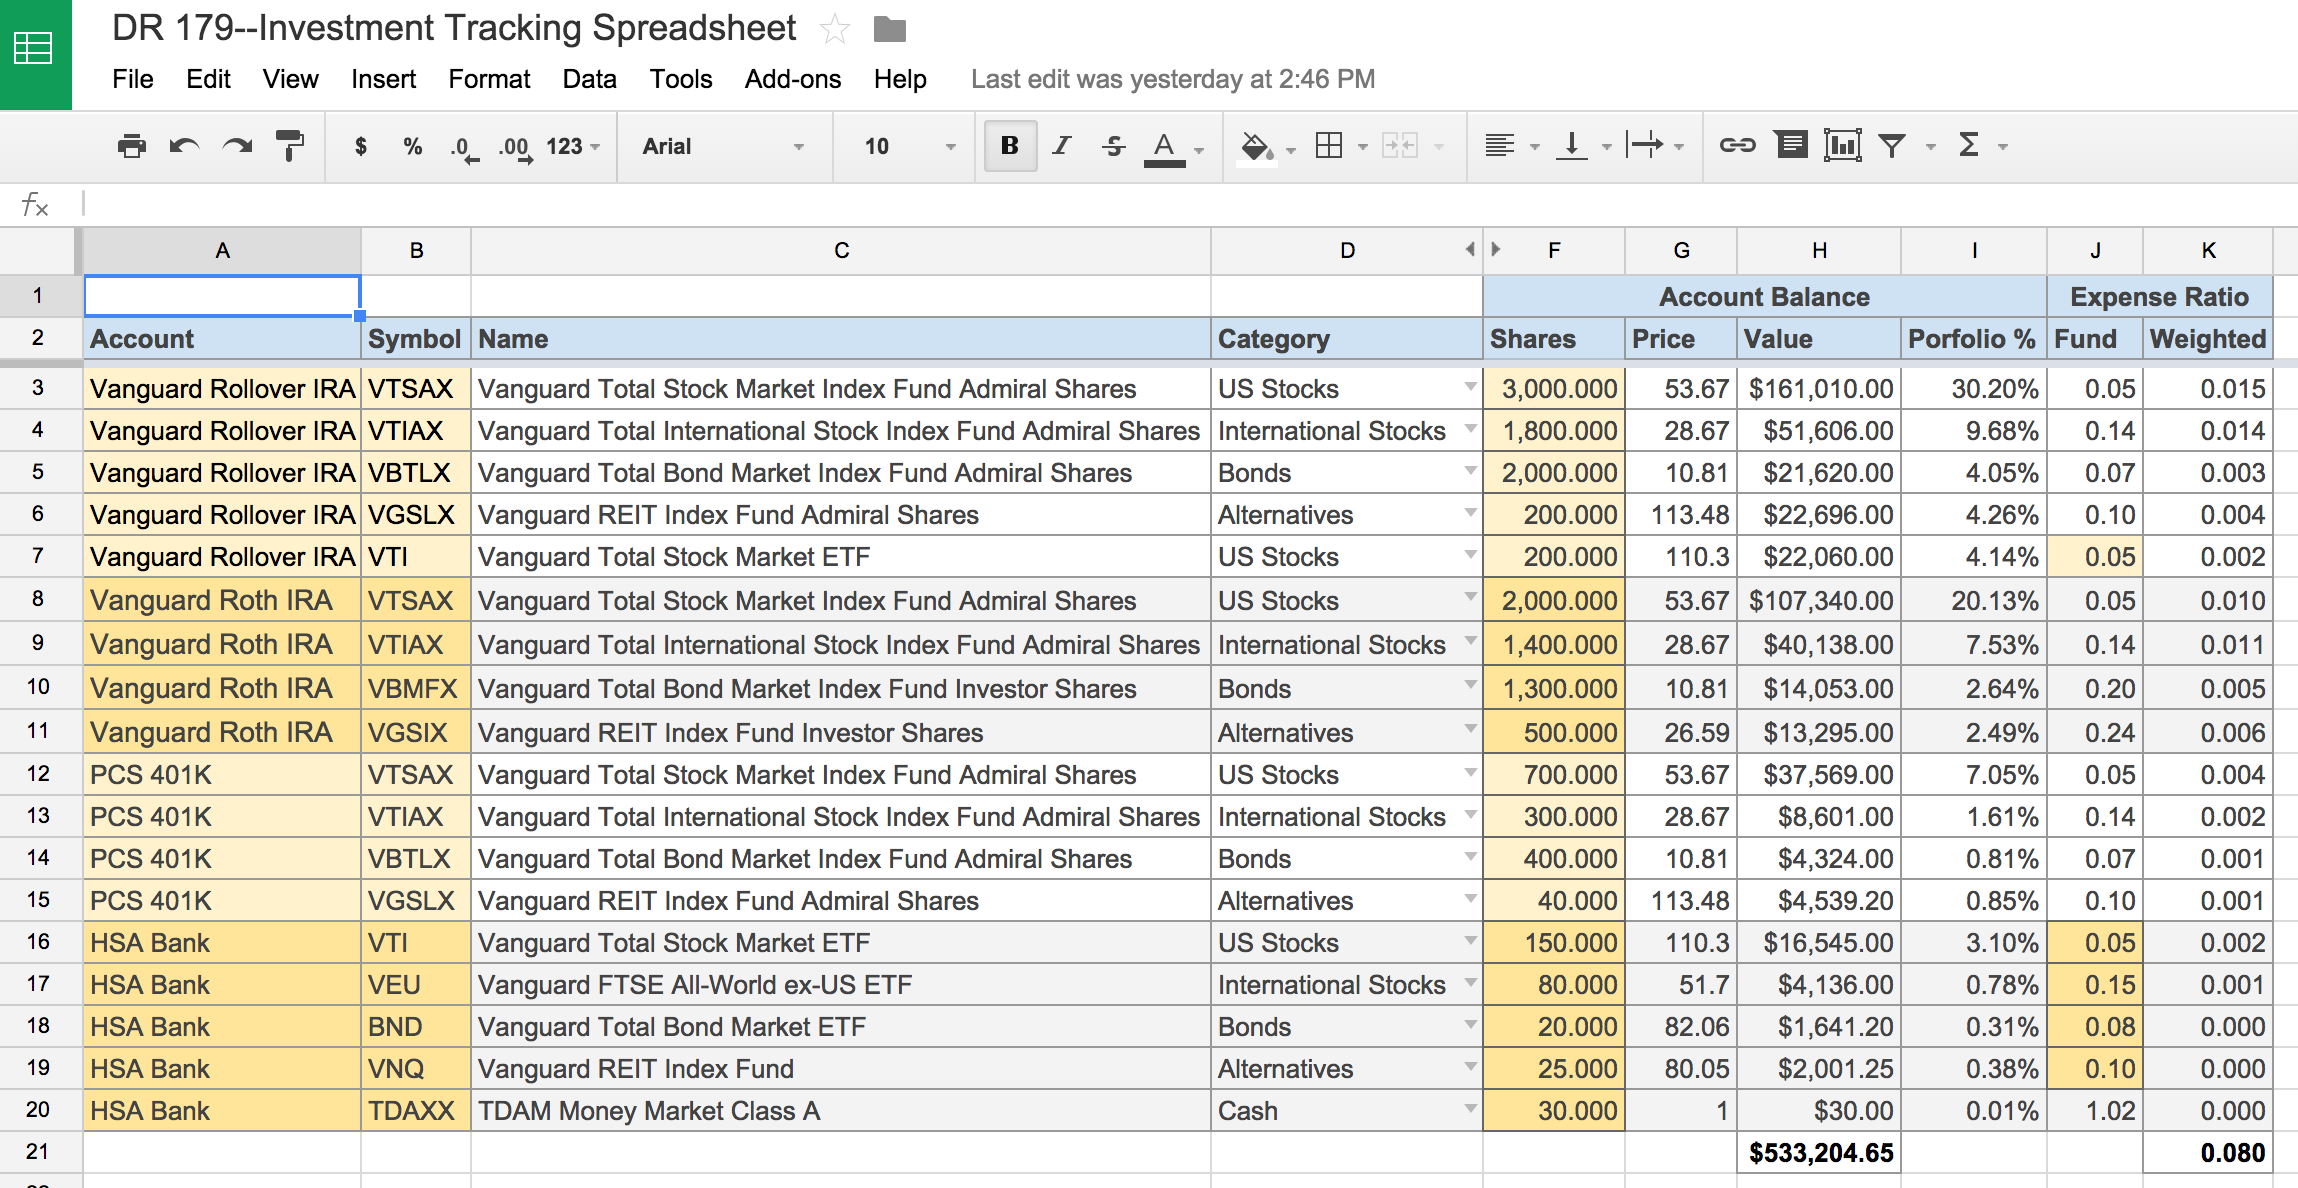 Resource Tracking Spreadsheet For Resource Tracking Spreadsheet Fmla Template Aboutplanning Org